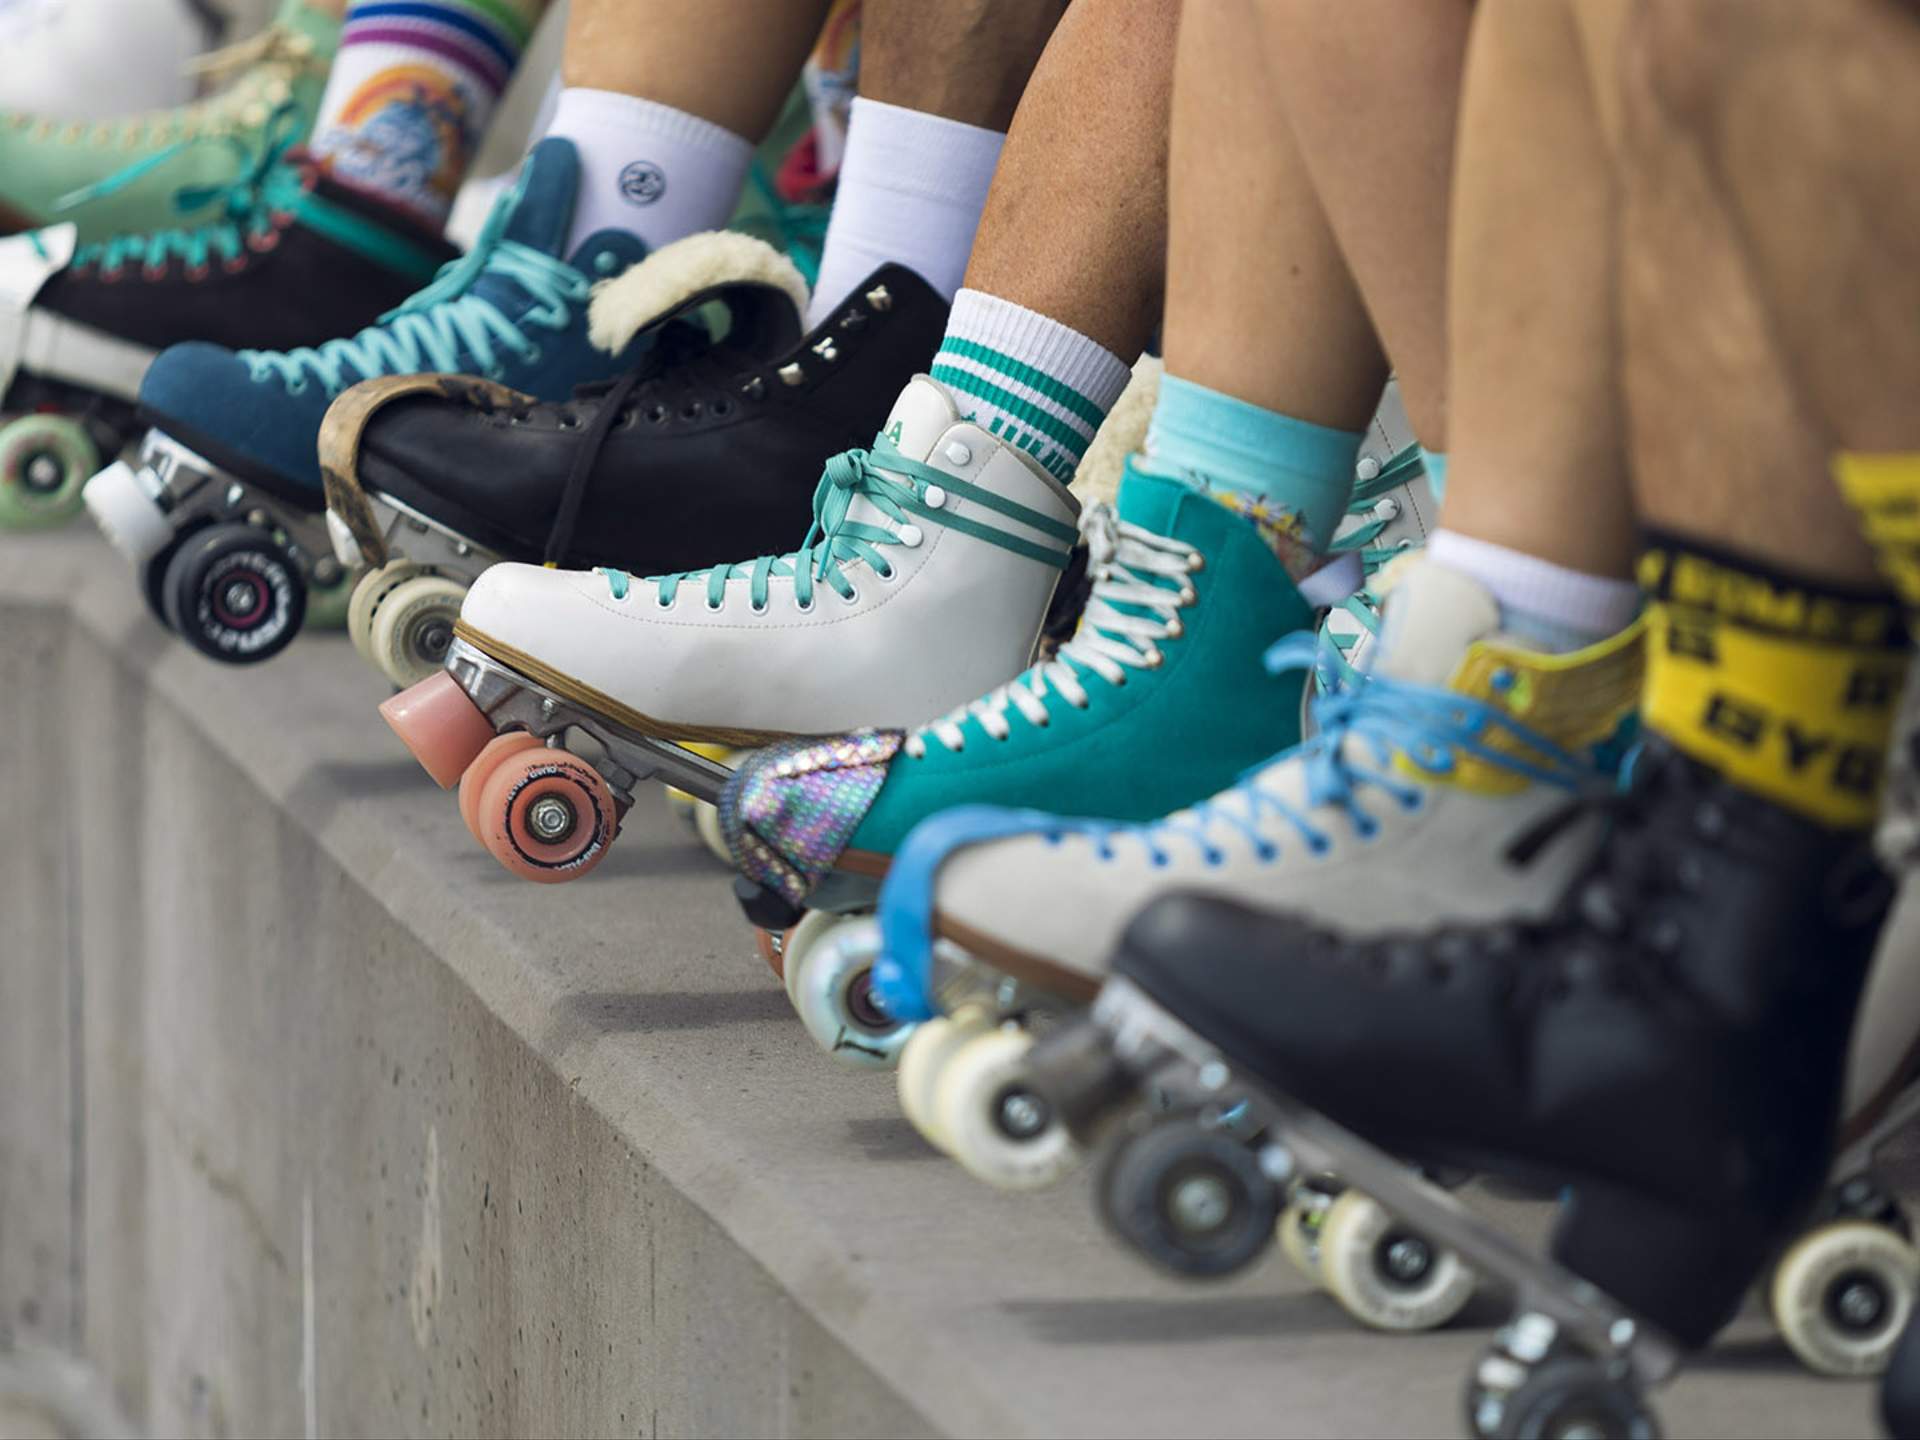 Roller Skates Vs Rollerblades For Exercise A Detailed Guide |  lacienciadelcafe.com.ar